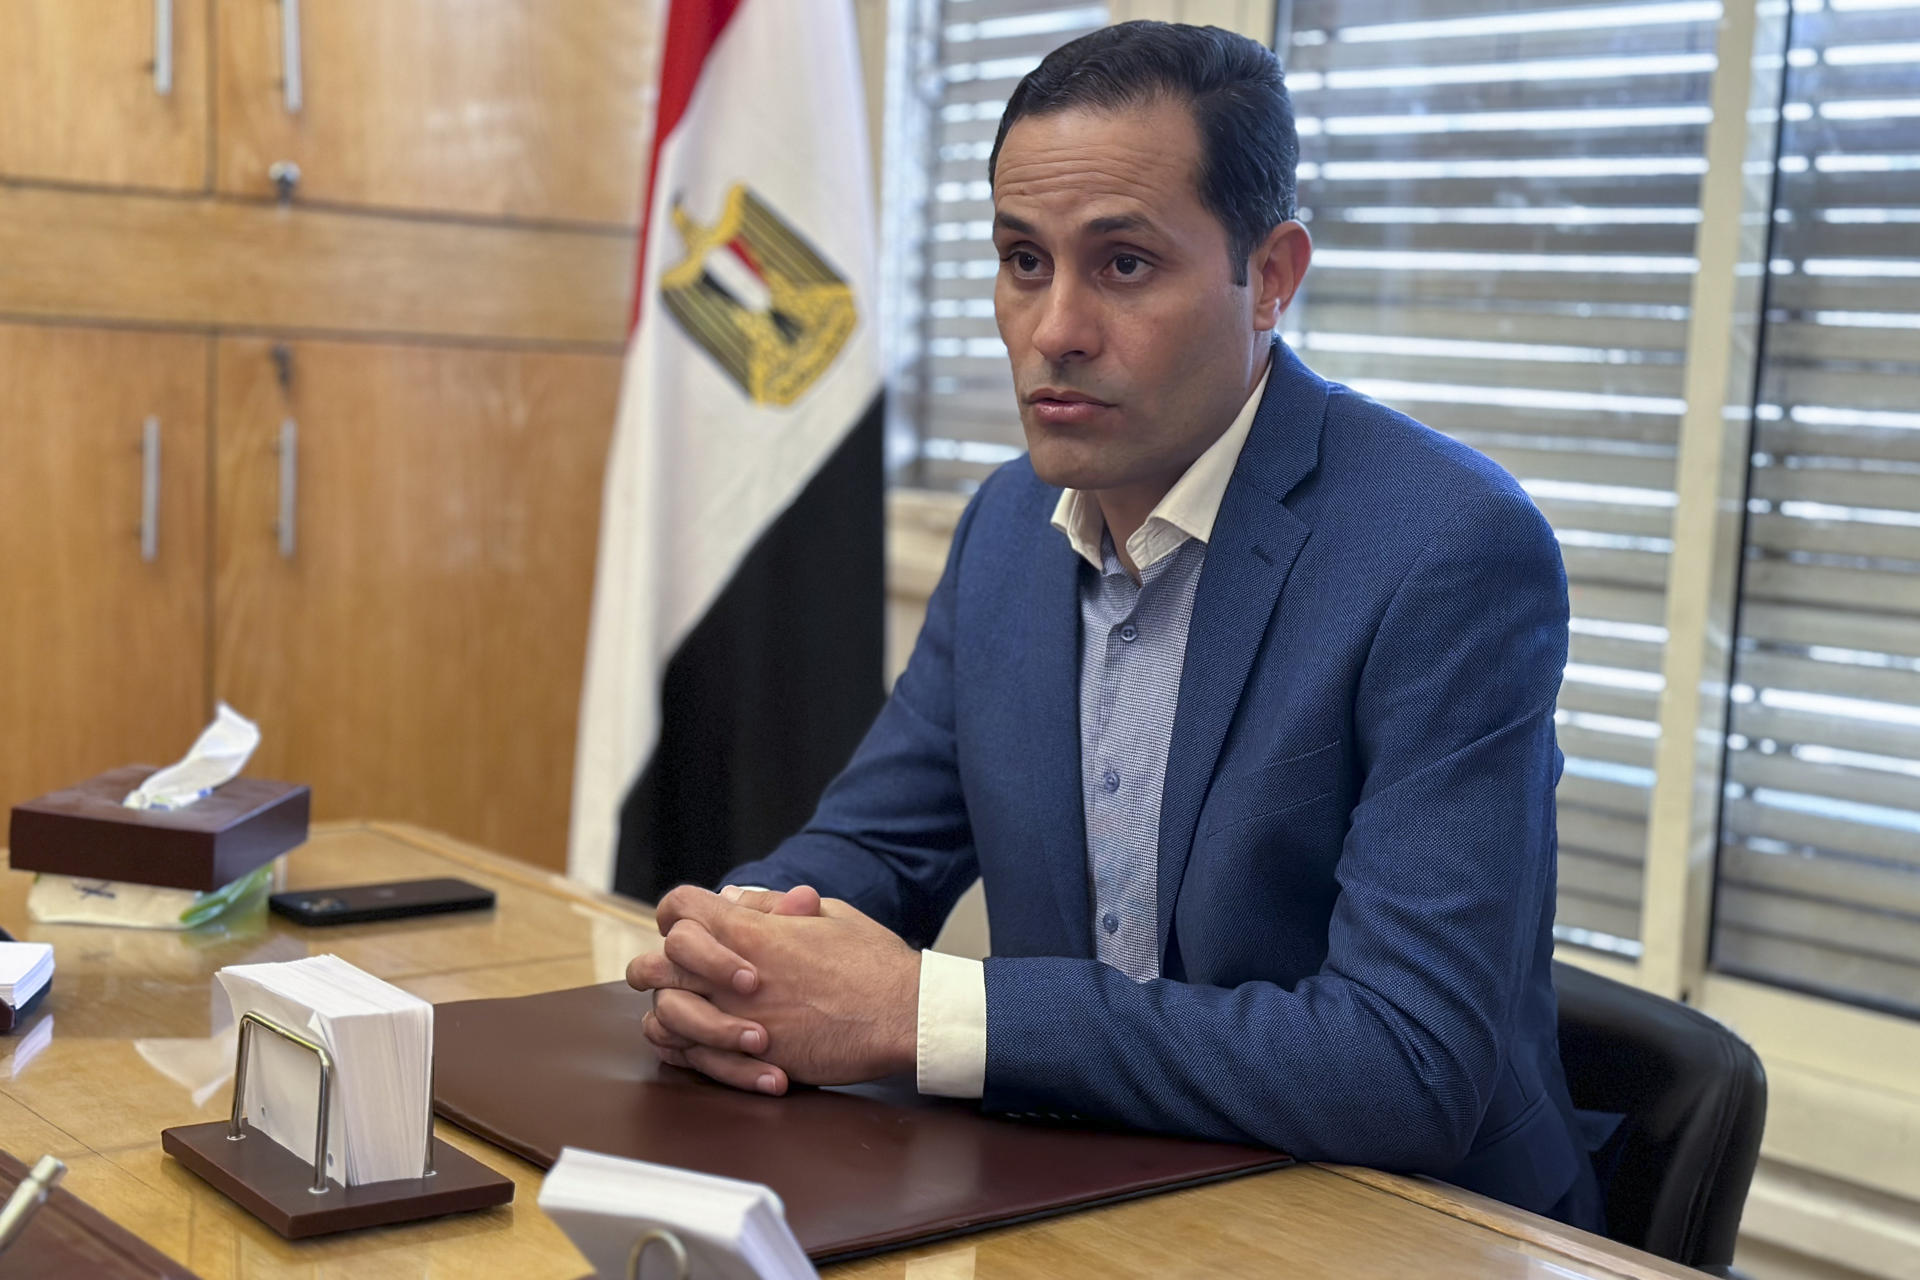 File photo of Ahmed Tantawy, a former MP and presidential hopeful in the Egyptian elections scheduled for 2024, in an interview with EFE at his office located in downtown Cairo, Egypt, 28 June 2023. EFE/Aya Ragheb